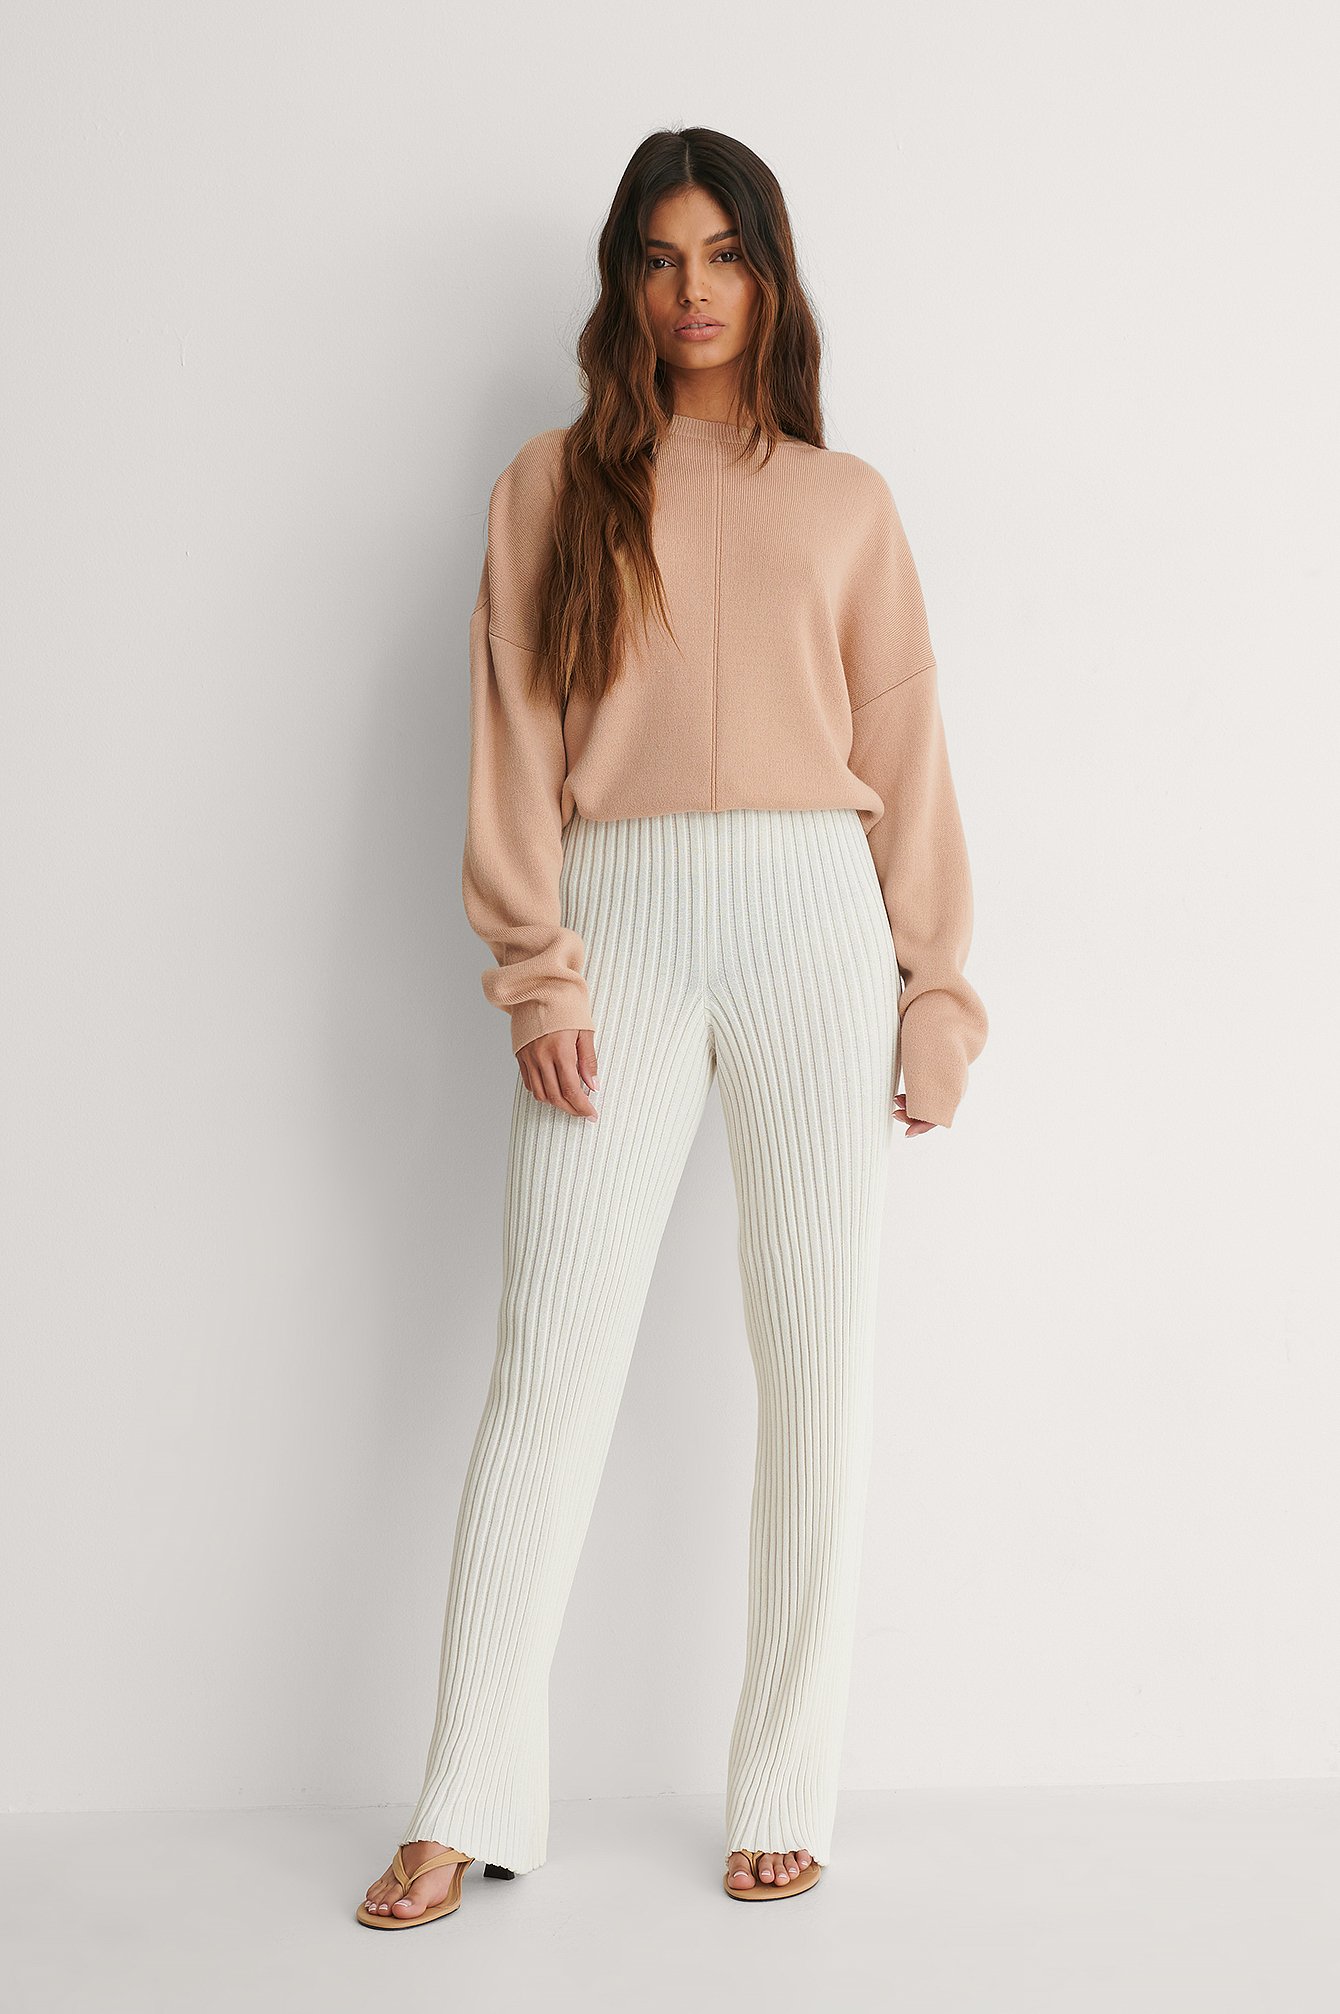 Ribbed Knitted Pants Outfit.